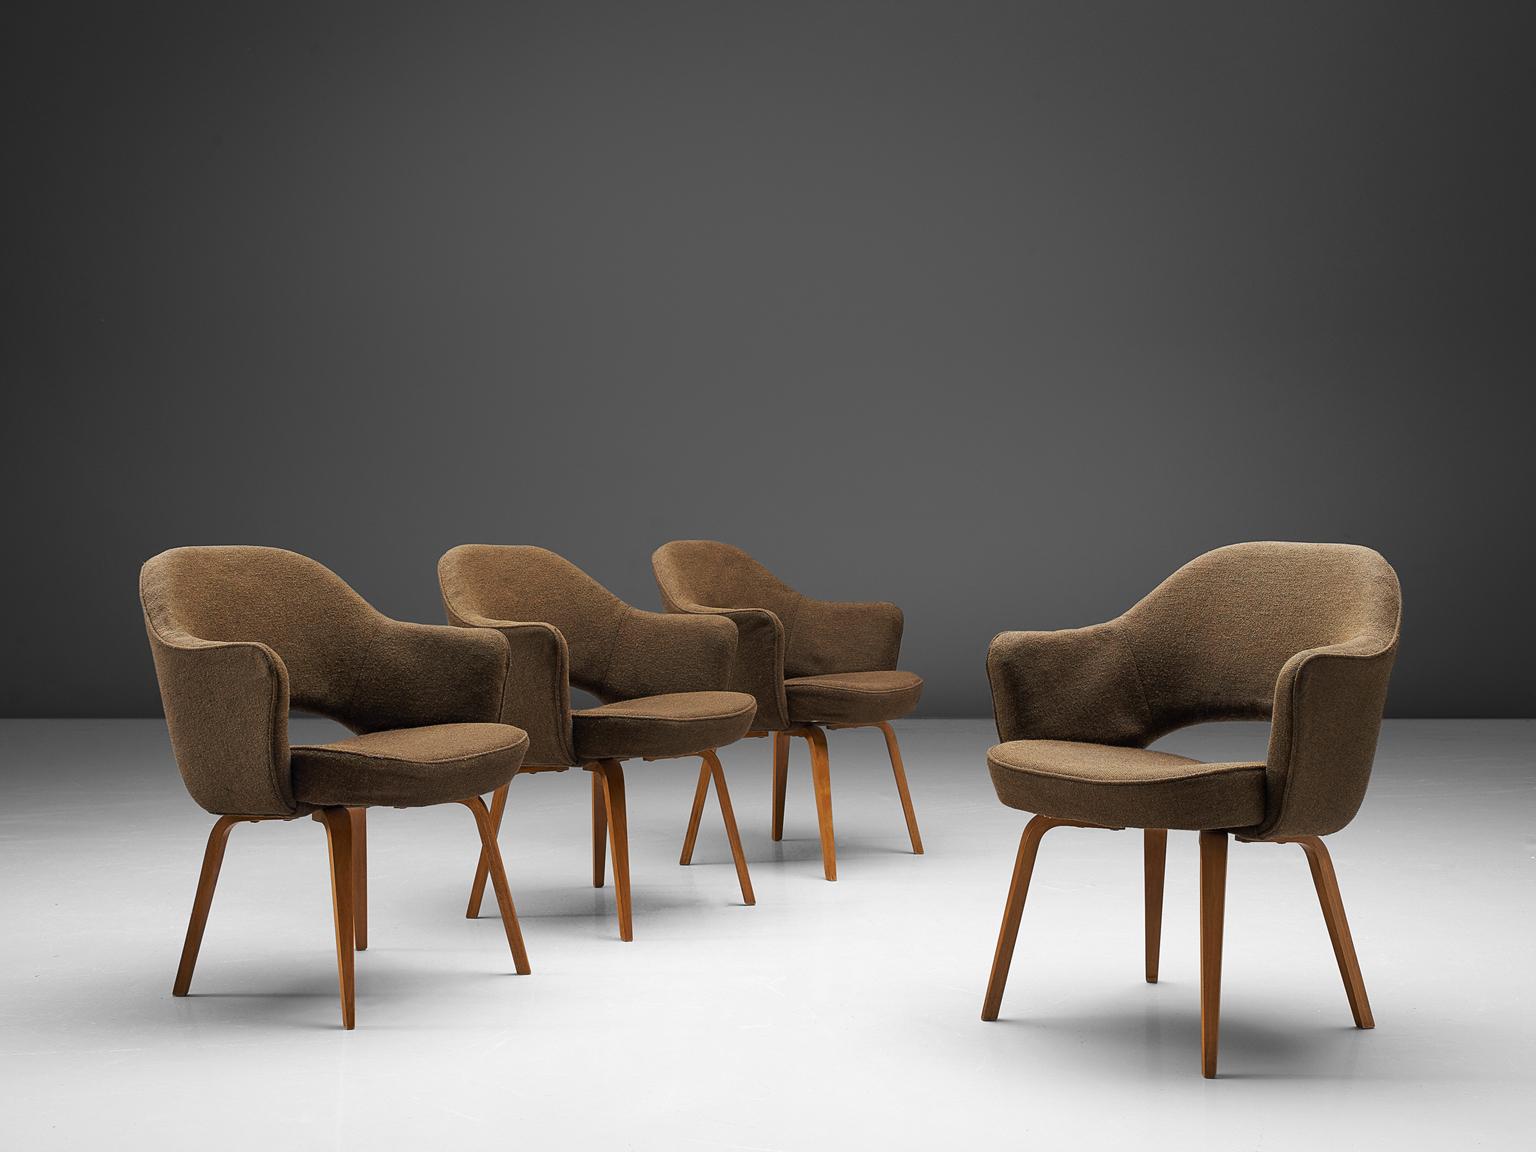 Eero Saarinen for Knoll International, set of four chairs model 71A, in wood and beige brown fabric, United States, 1948. 

Four iconic armchairs designed by Eero Saarinen. This iconic model is reupholstered in a brown grey fabric. The chairs